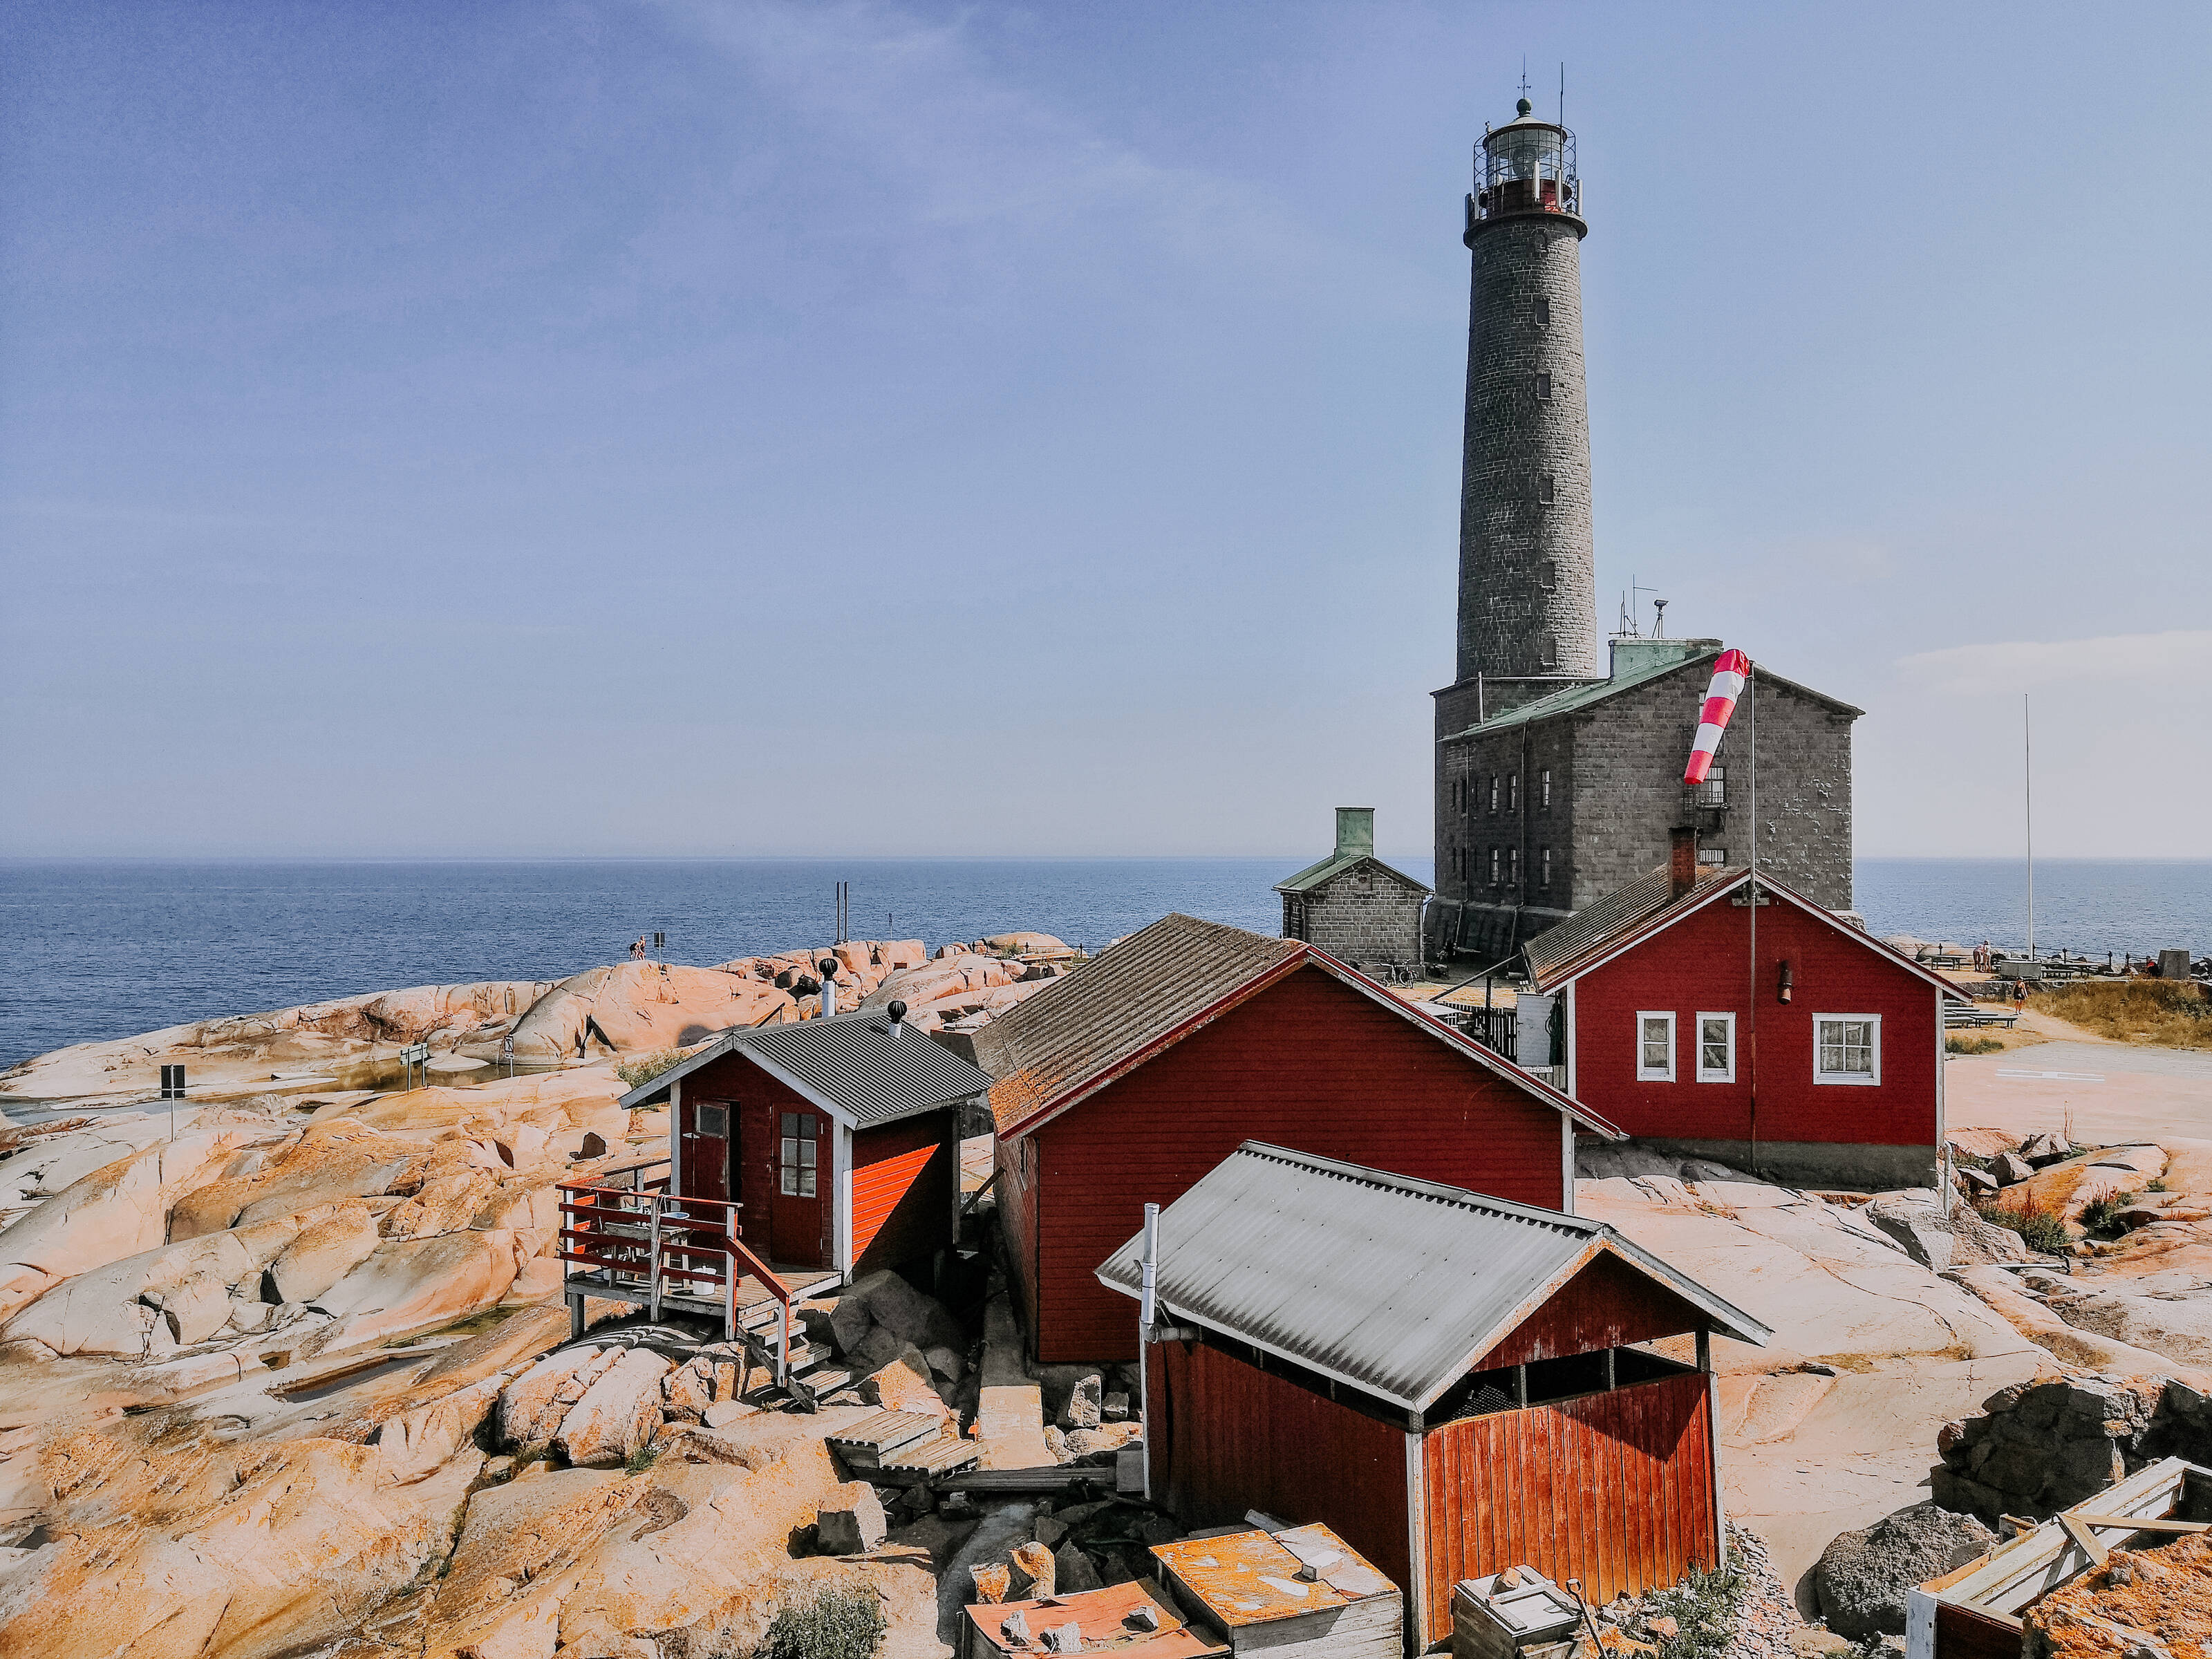 a massive old lighthouse on the islet in the Finnish archipelago